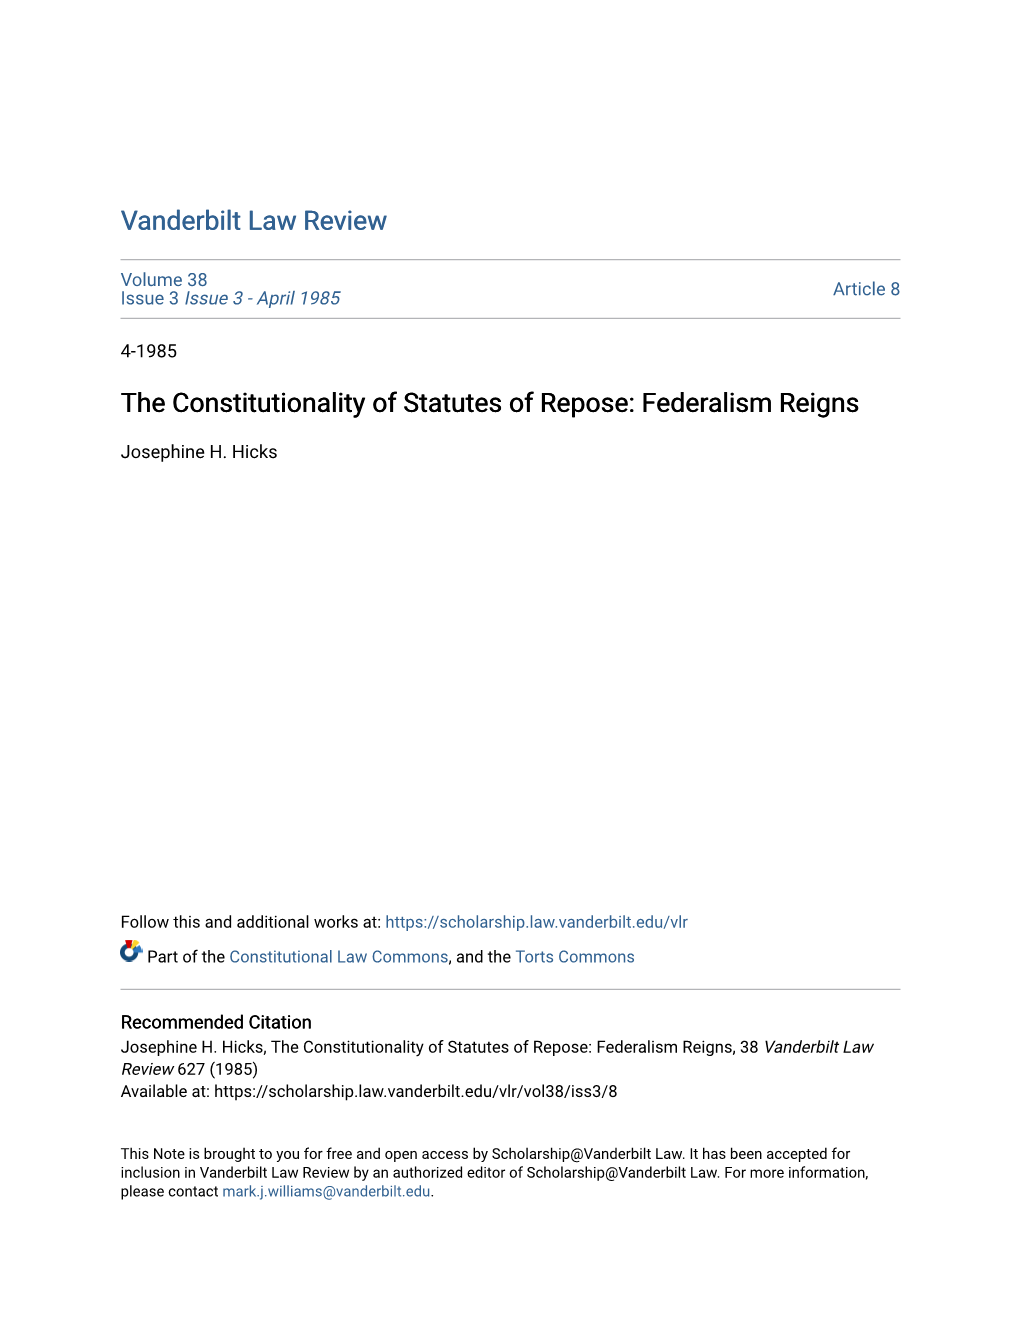 The Constitutionality of Statutes of Repose: Federalism Reigns